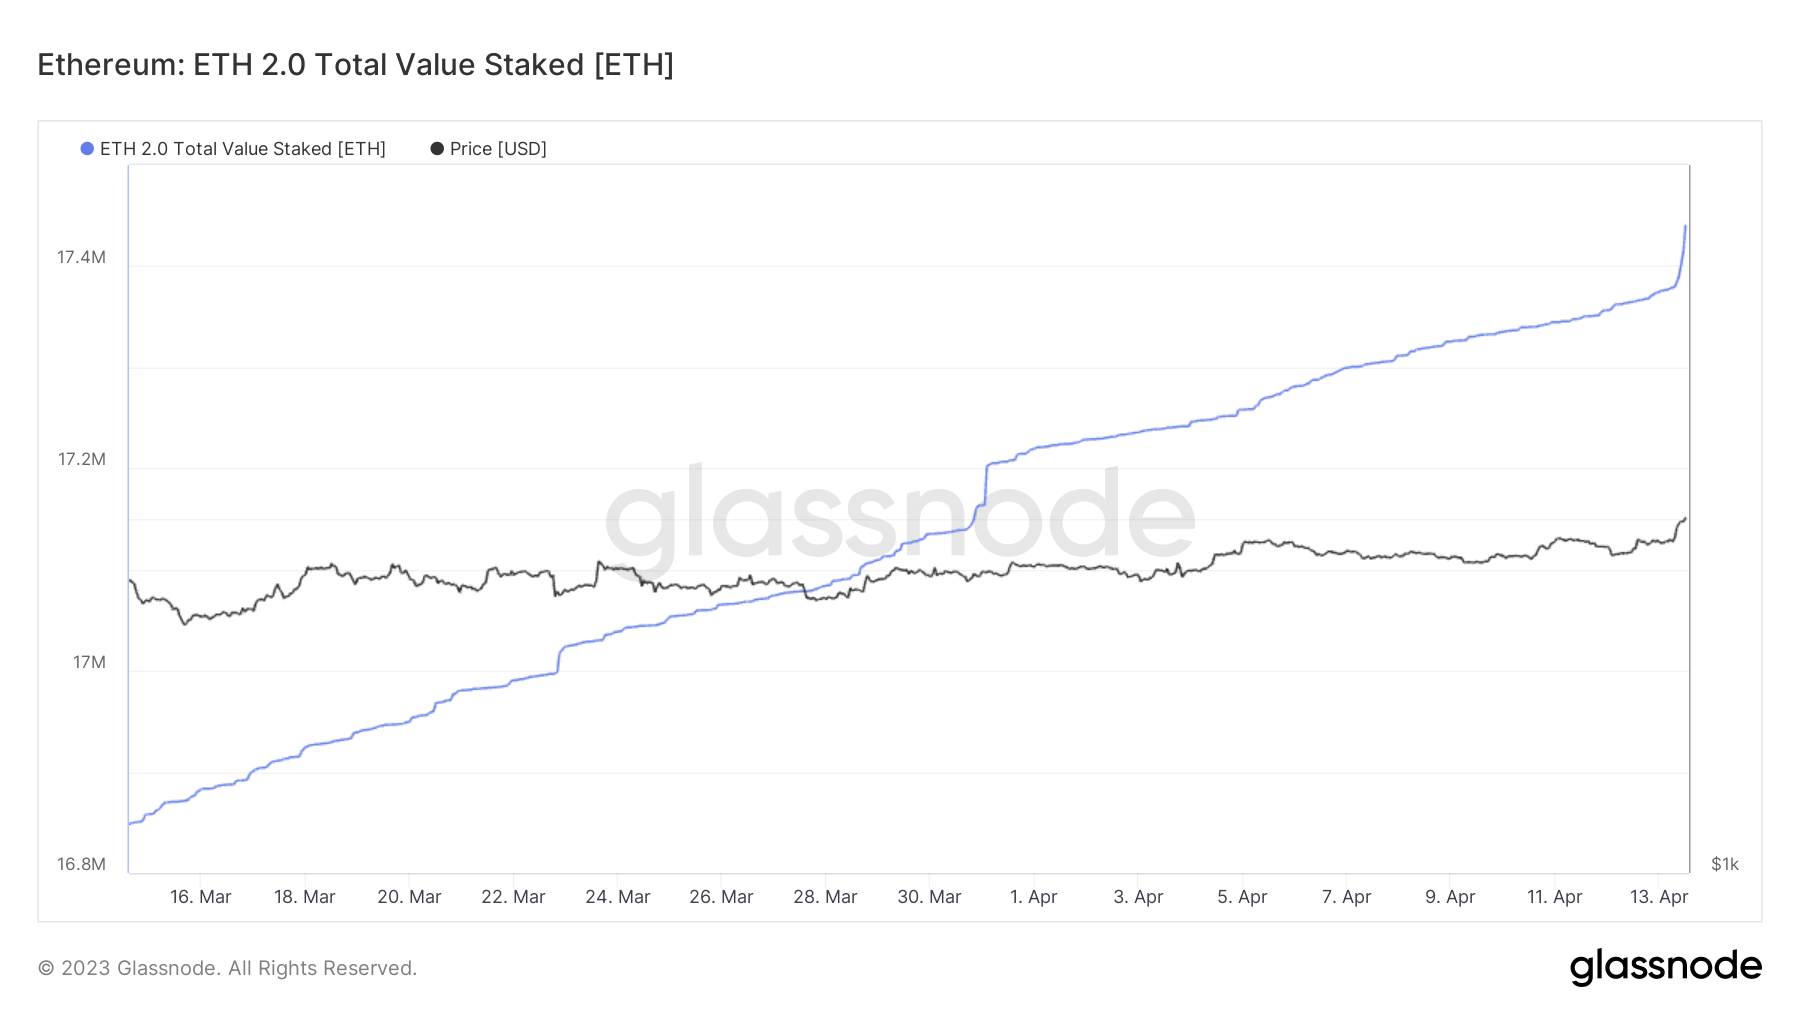 ETH Total Value Staked